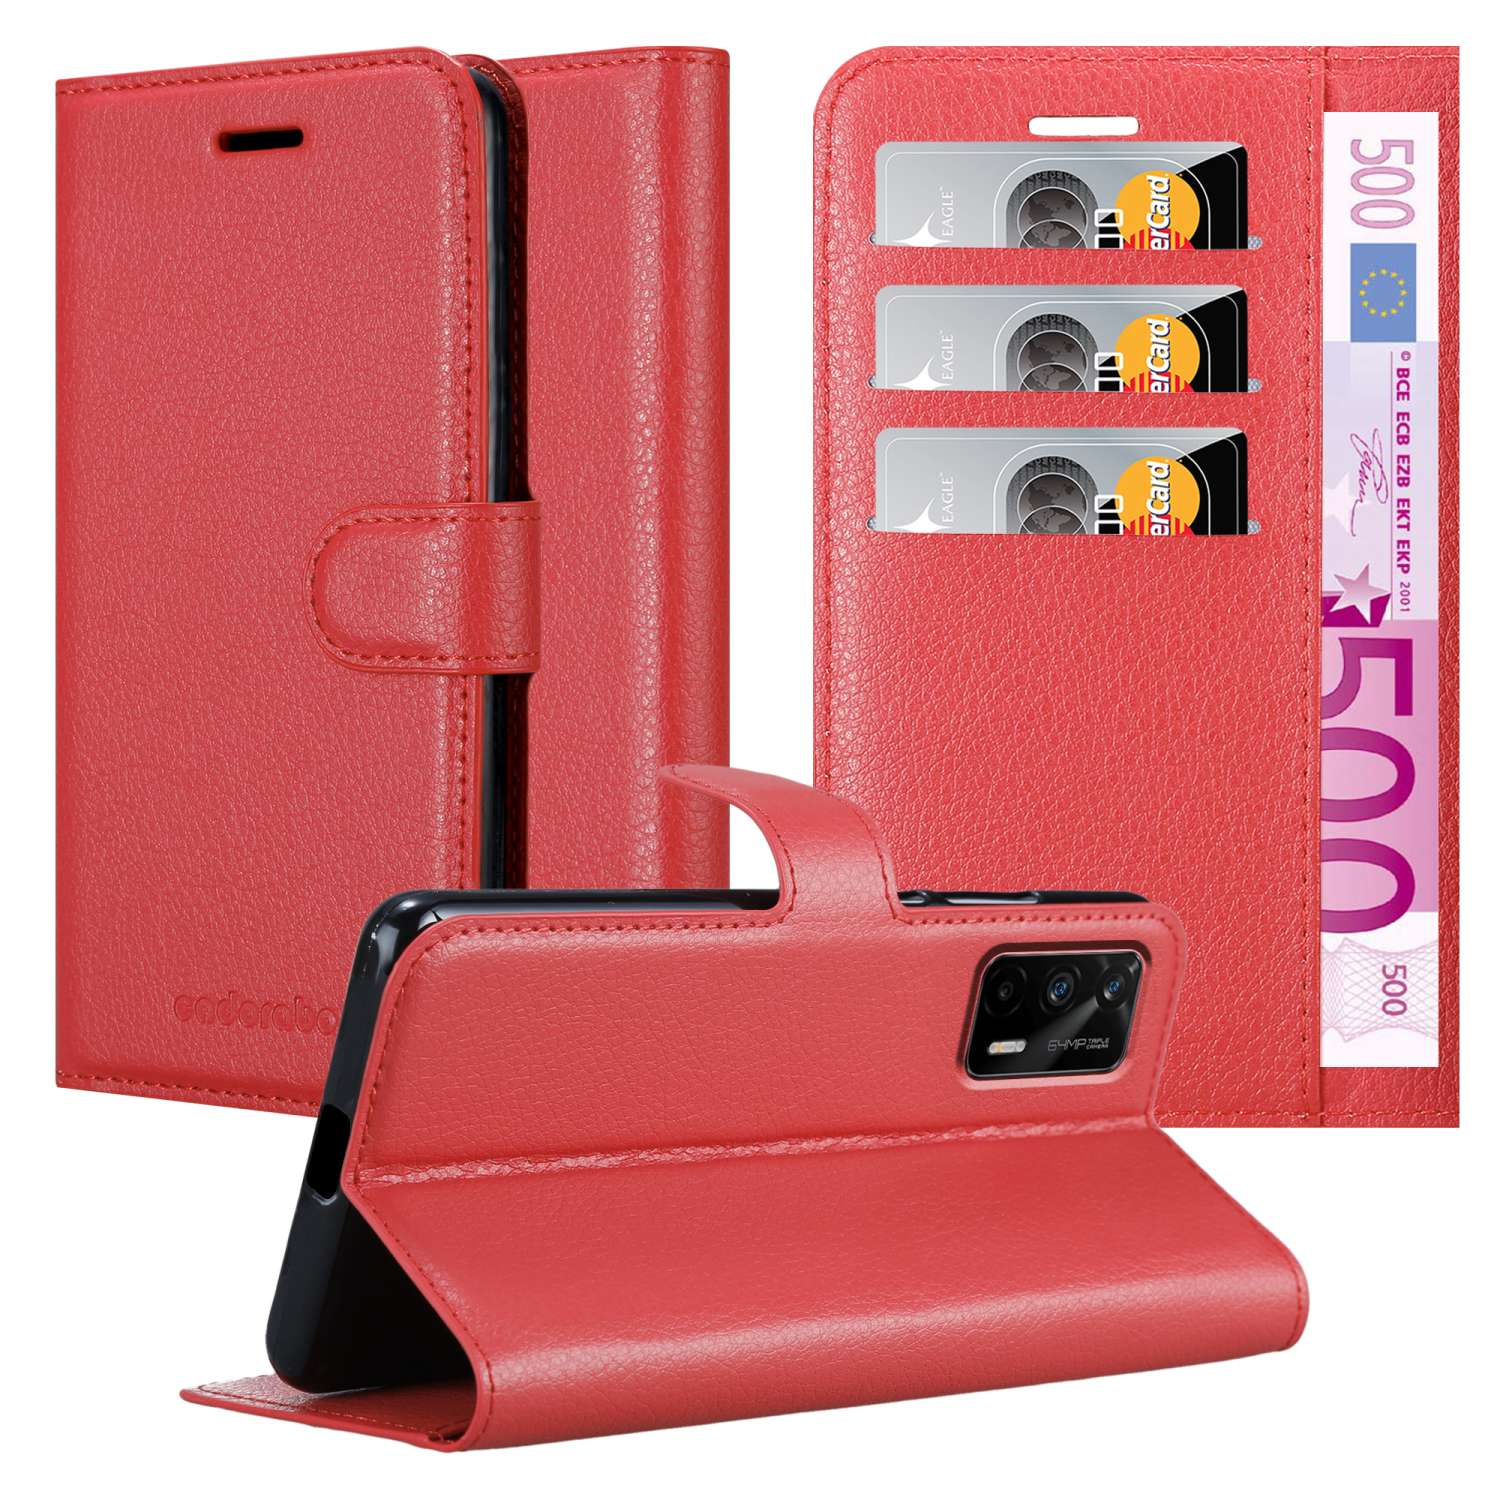 PRO, / Neo GT Hülle Book GT Standfunktion, KARMIN ROT Bookcover, Q3 / 2T Realme, CADORABO